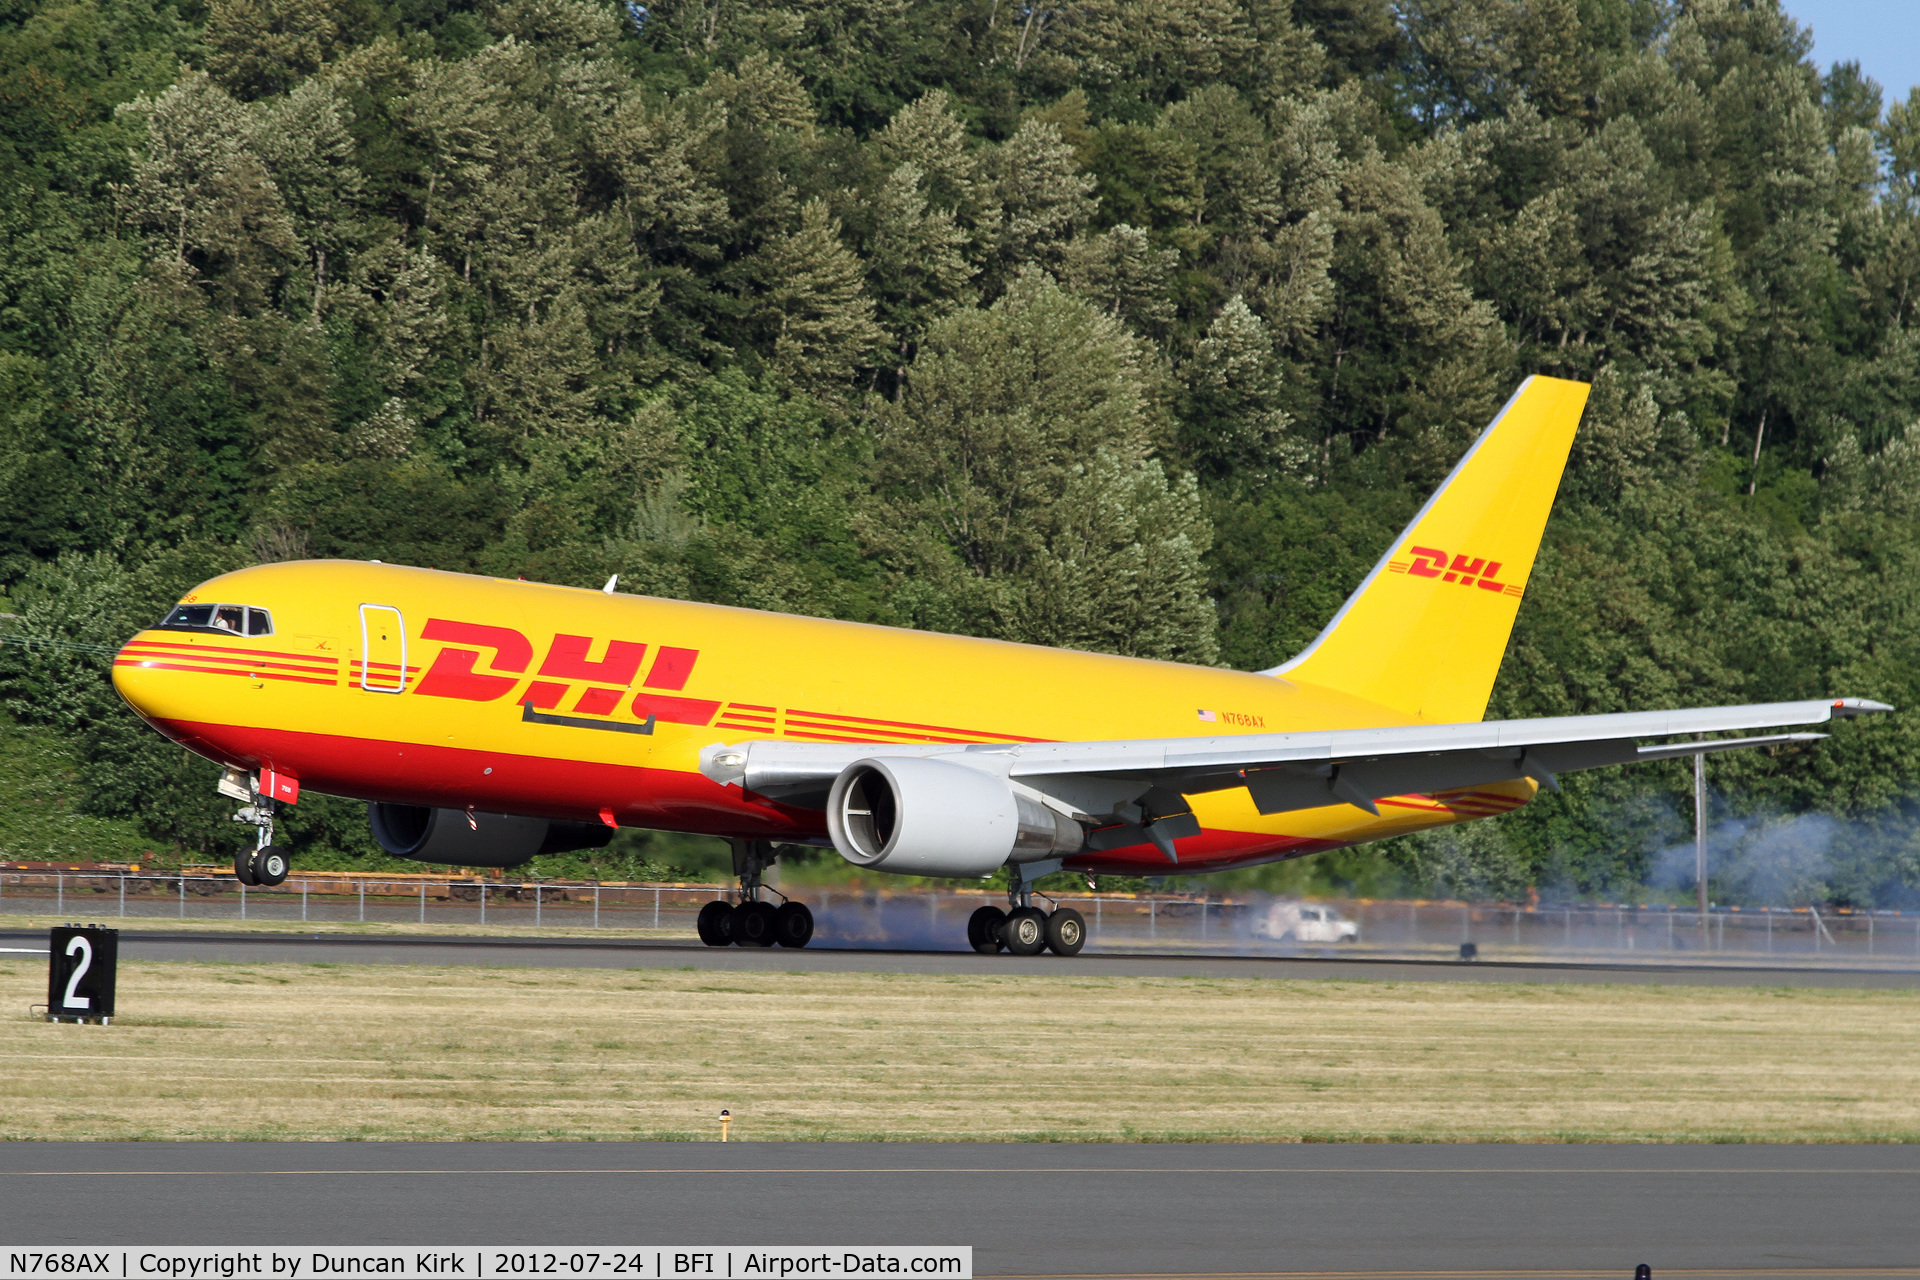 N768AX, 1983 Boeing 767-281 C/N 22786, The unmistakable colors of DHL